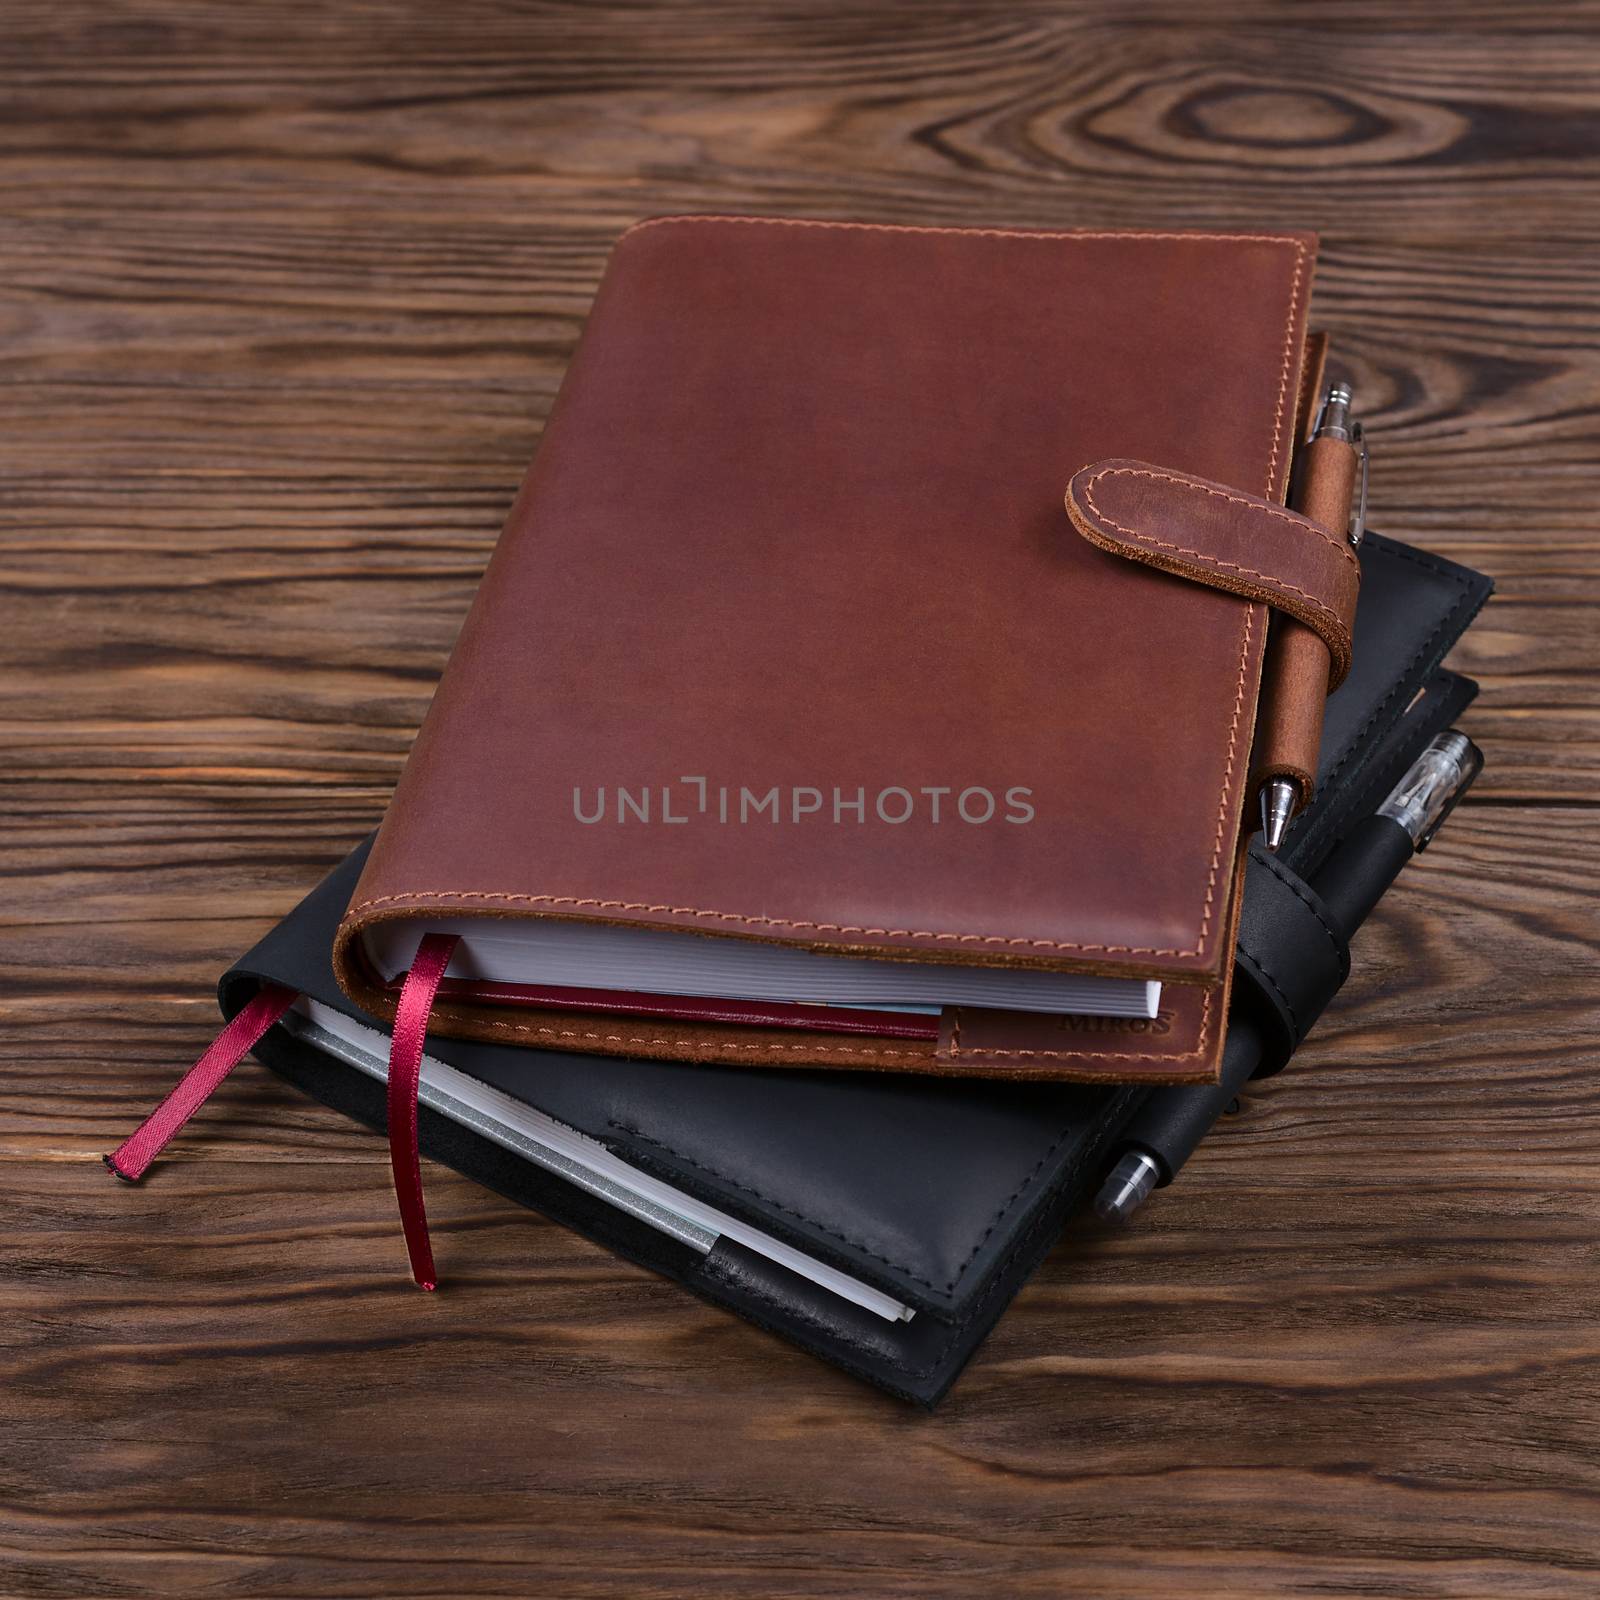 Brown and black handmade leather notebook covers with notebook and pen inside on wooden background. Stock photo of luxury business accessories. by alexsdriver